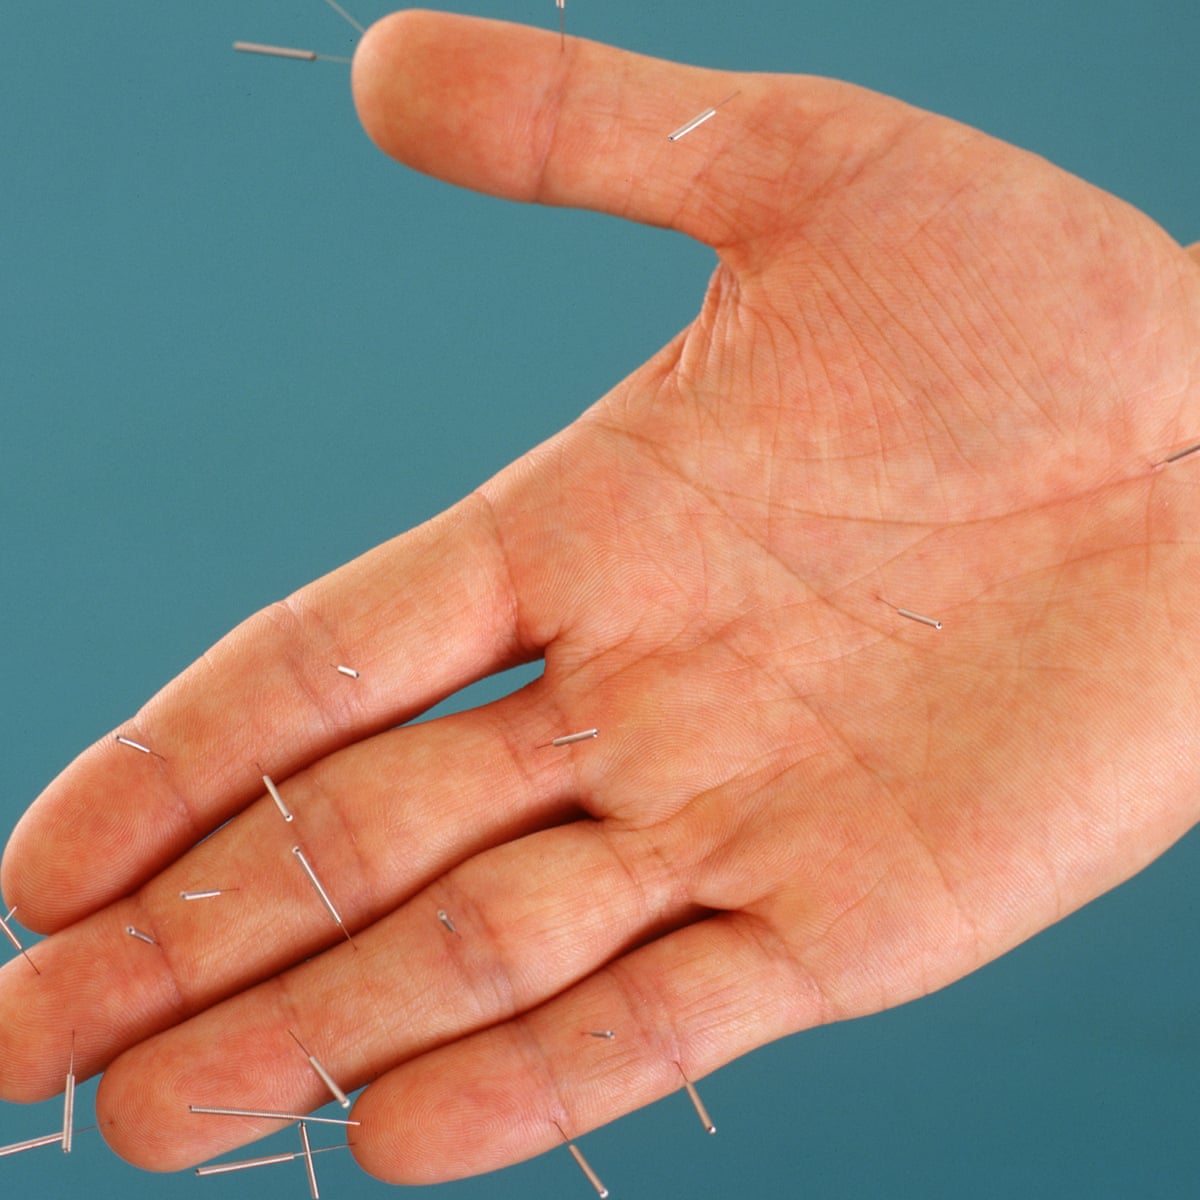 Acupuncture For Fertility In Encino